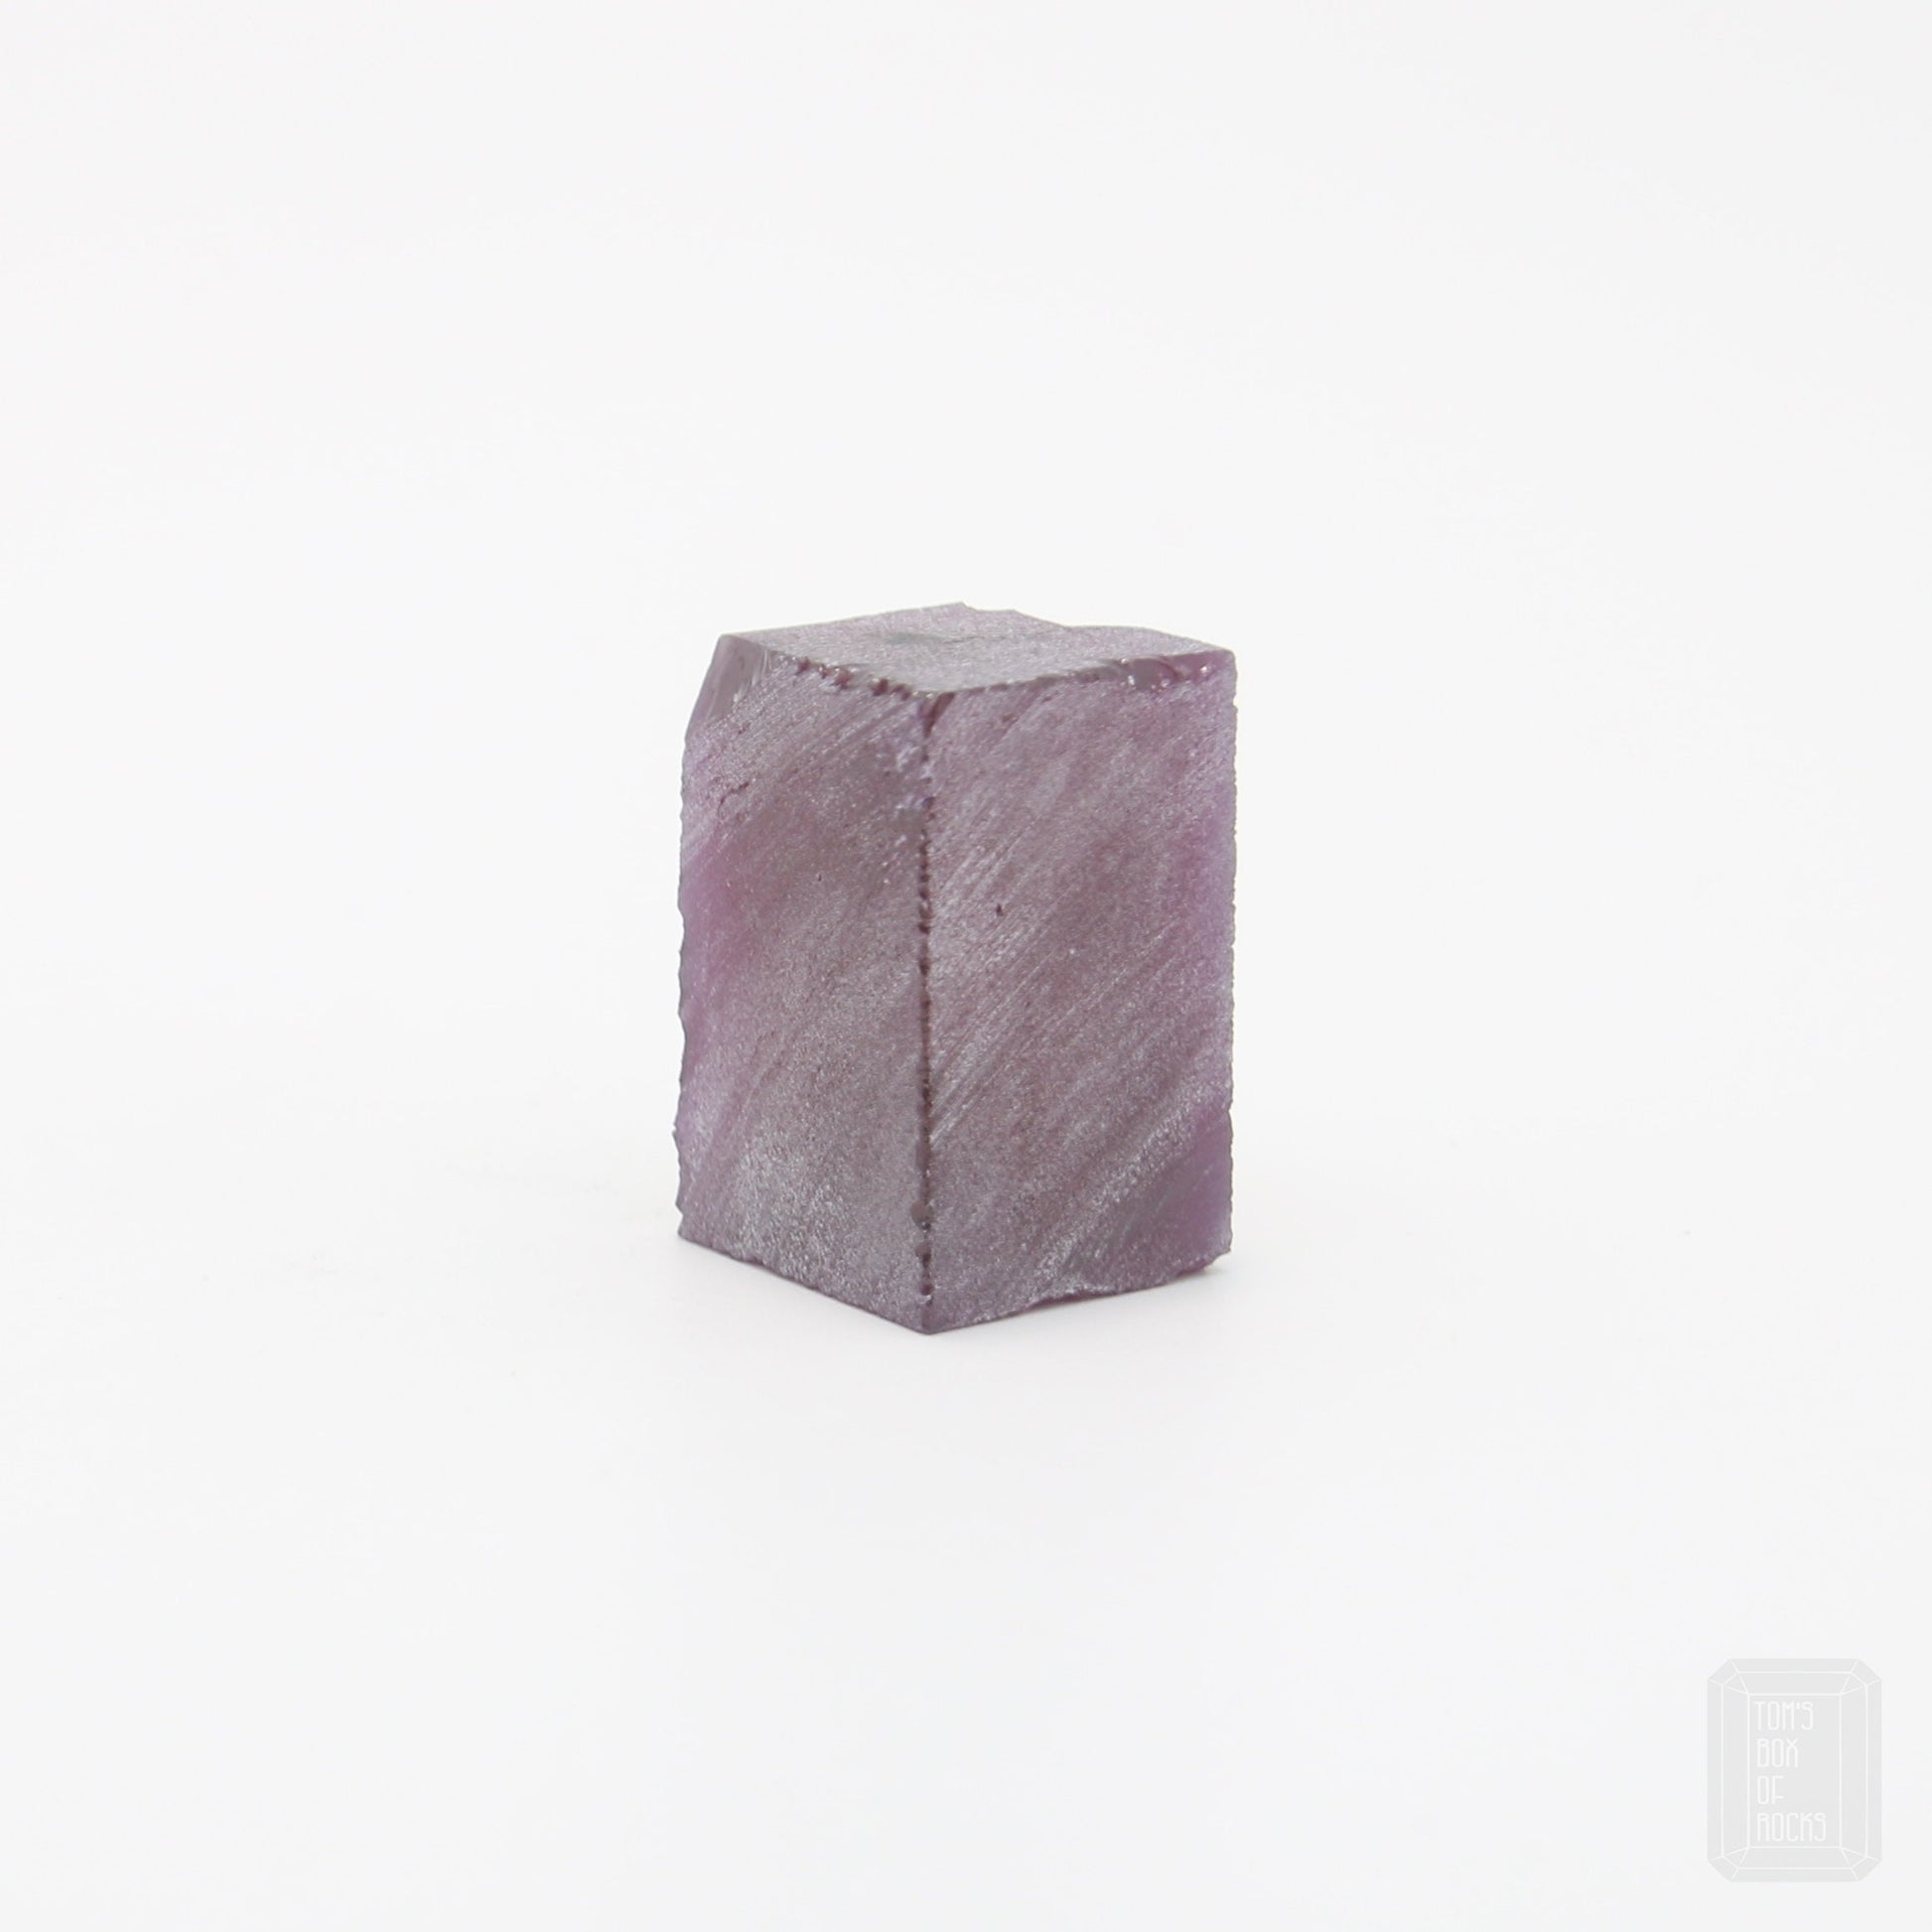 Light Ruby (Included) Nanosital Synthetic Lab Created Faceting Rough for Gem Cutting - #Z-249 - Various Sizes